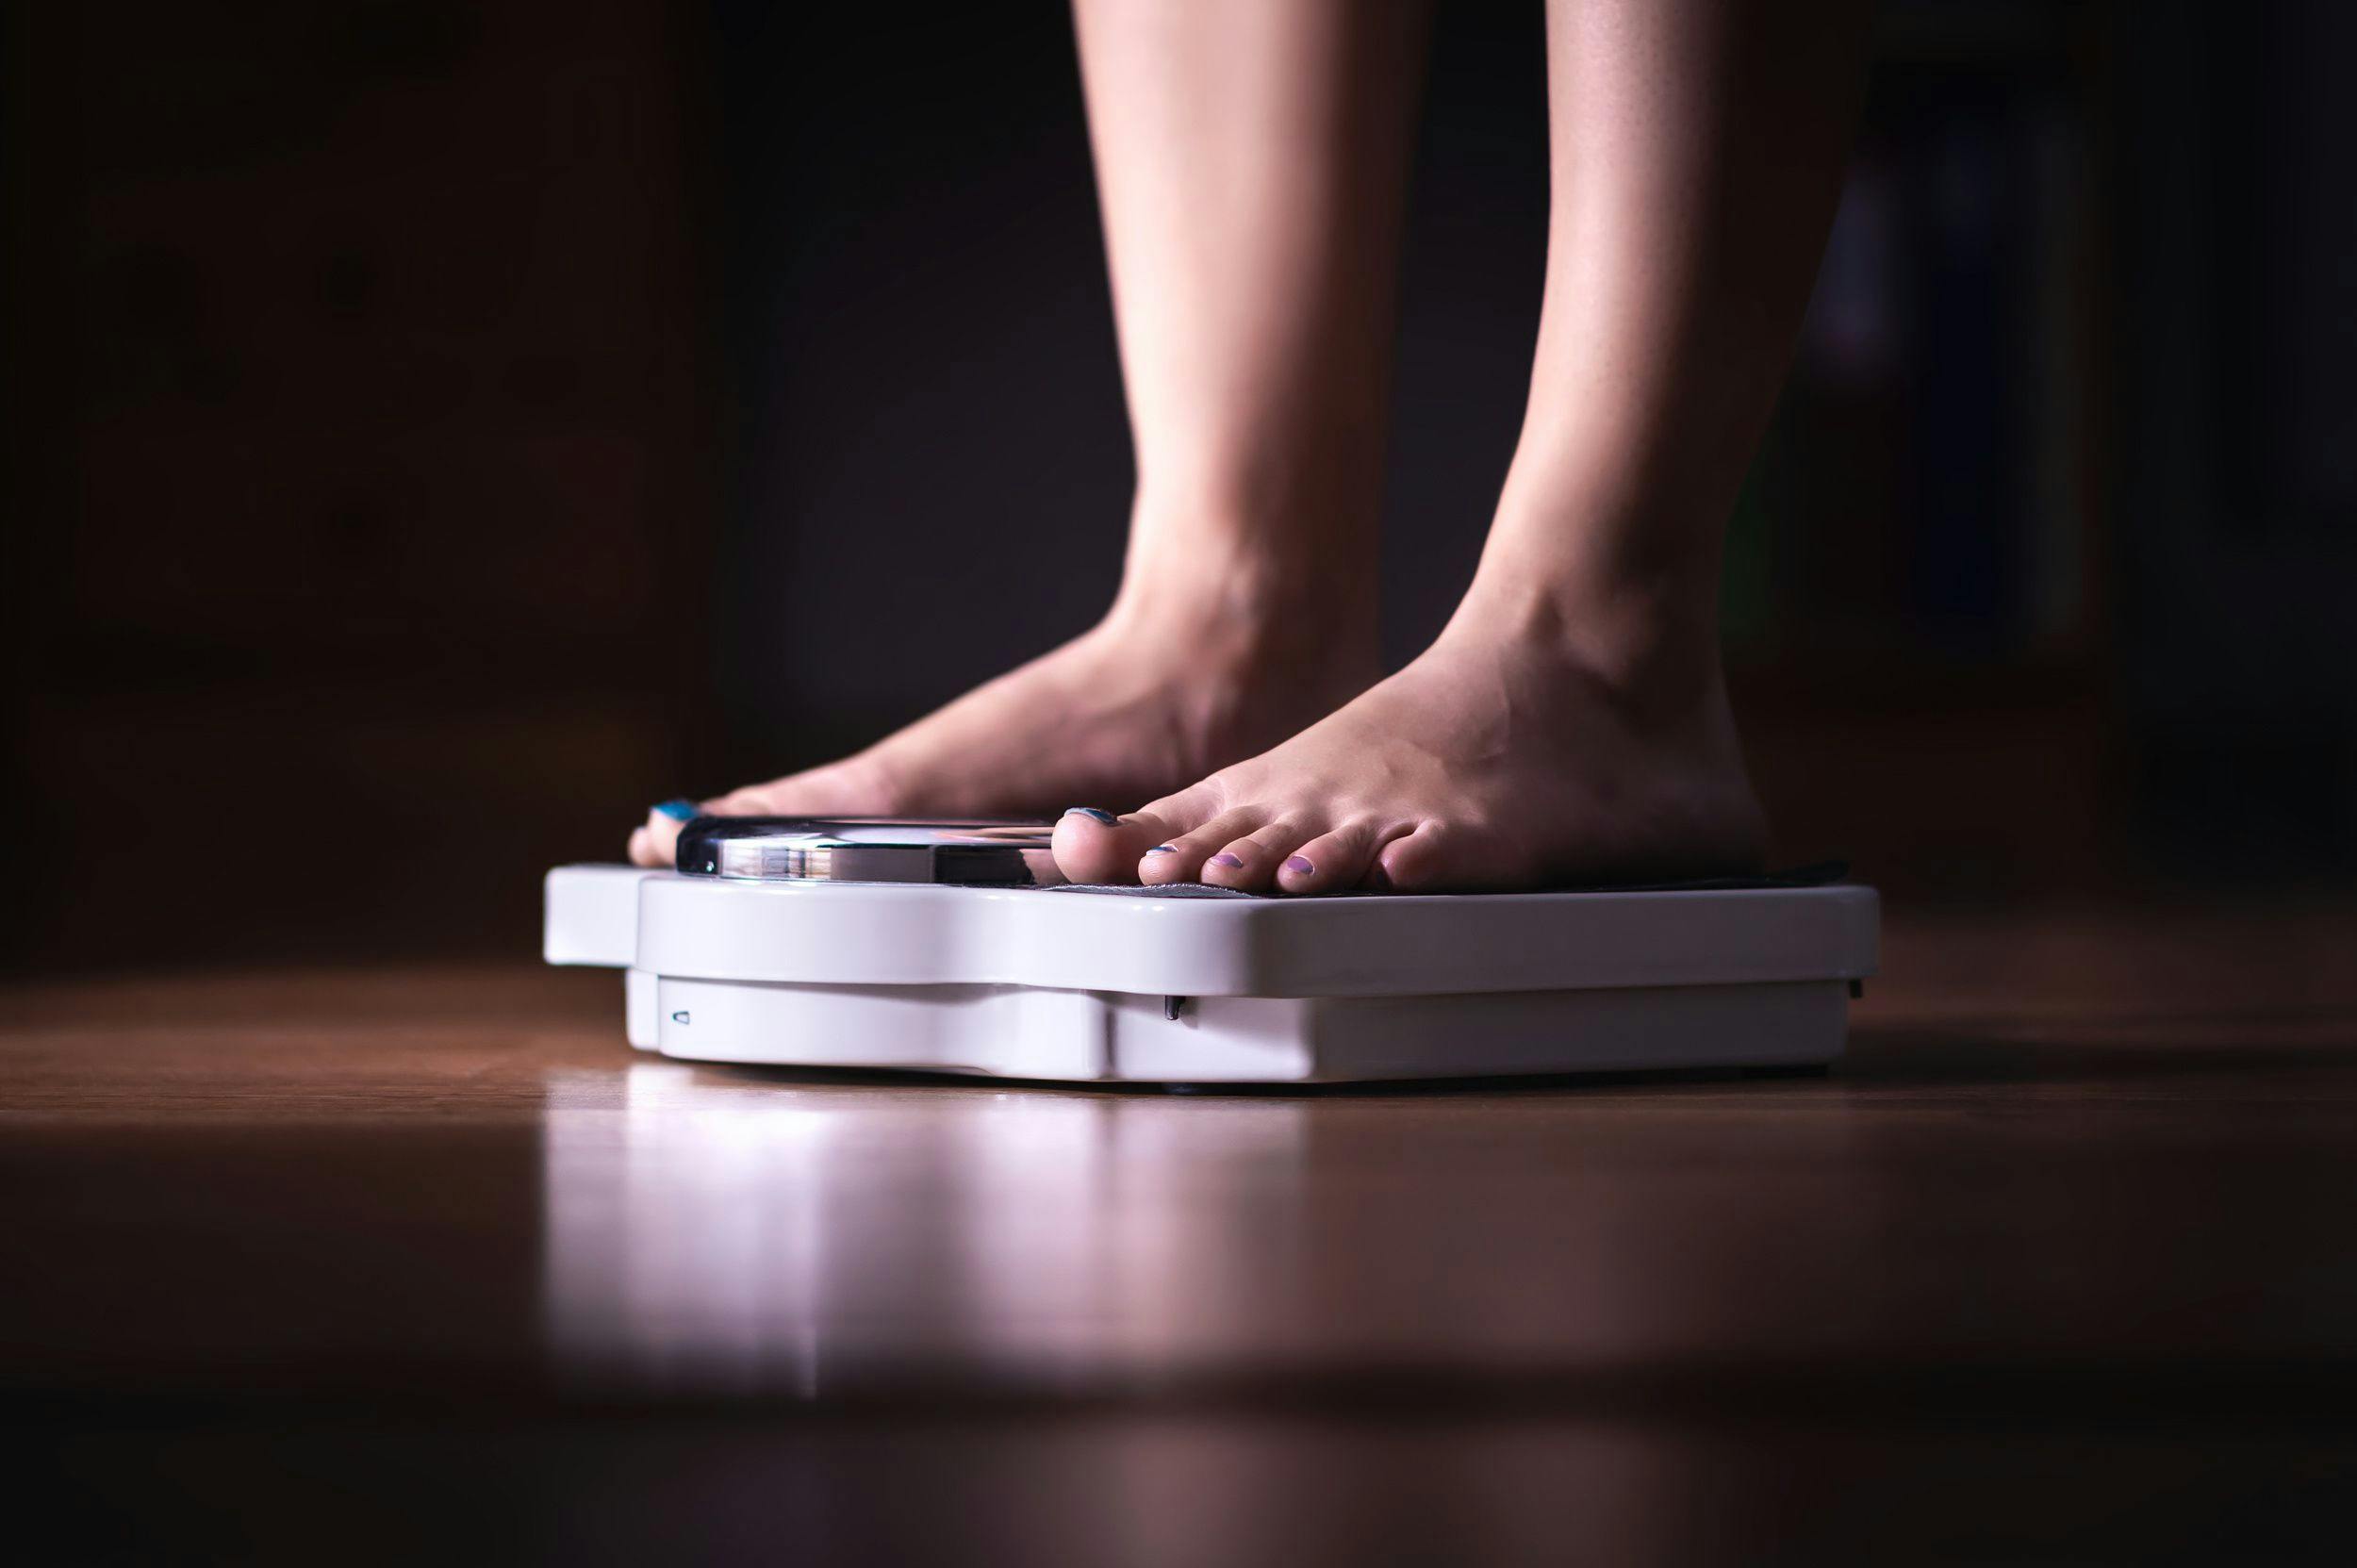 Similar delivery times between misoprostol dosages among obese patients reported | Image Credit: © terovesalainen - © terovesalainen - stock.adobe.com.